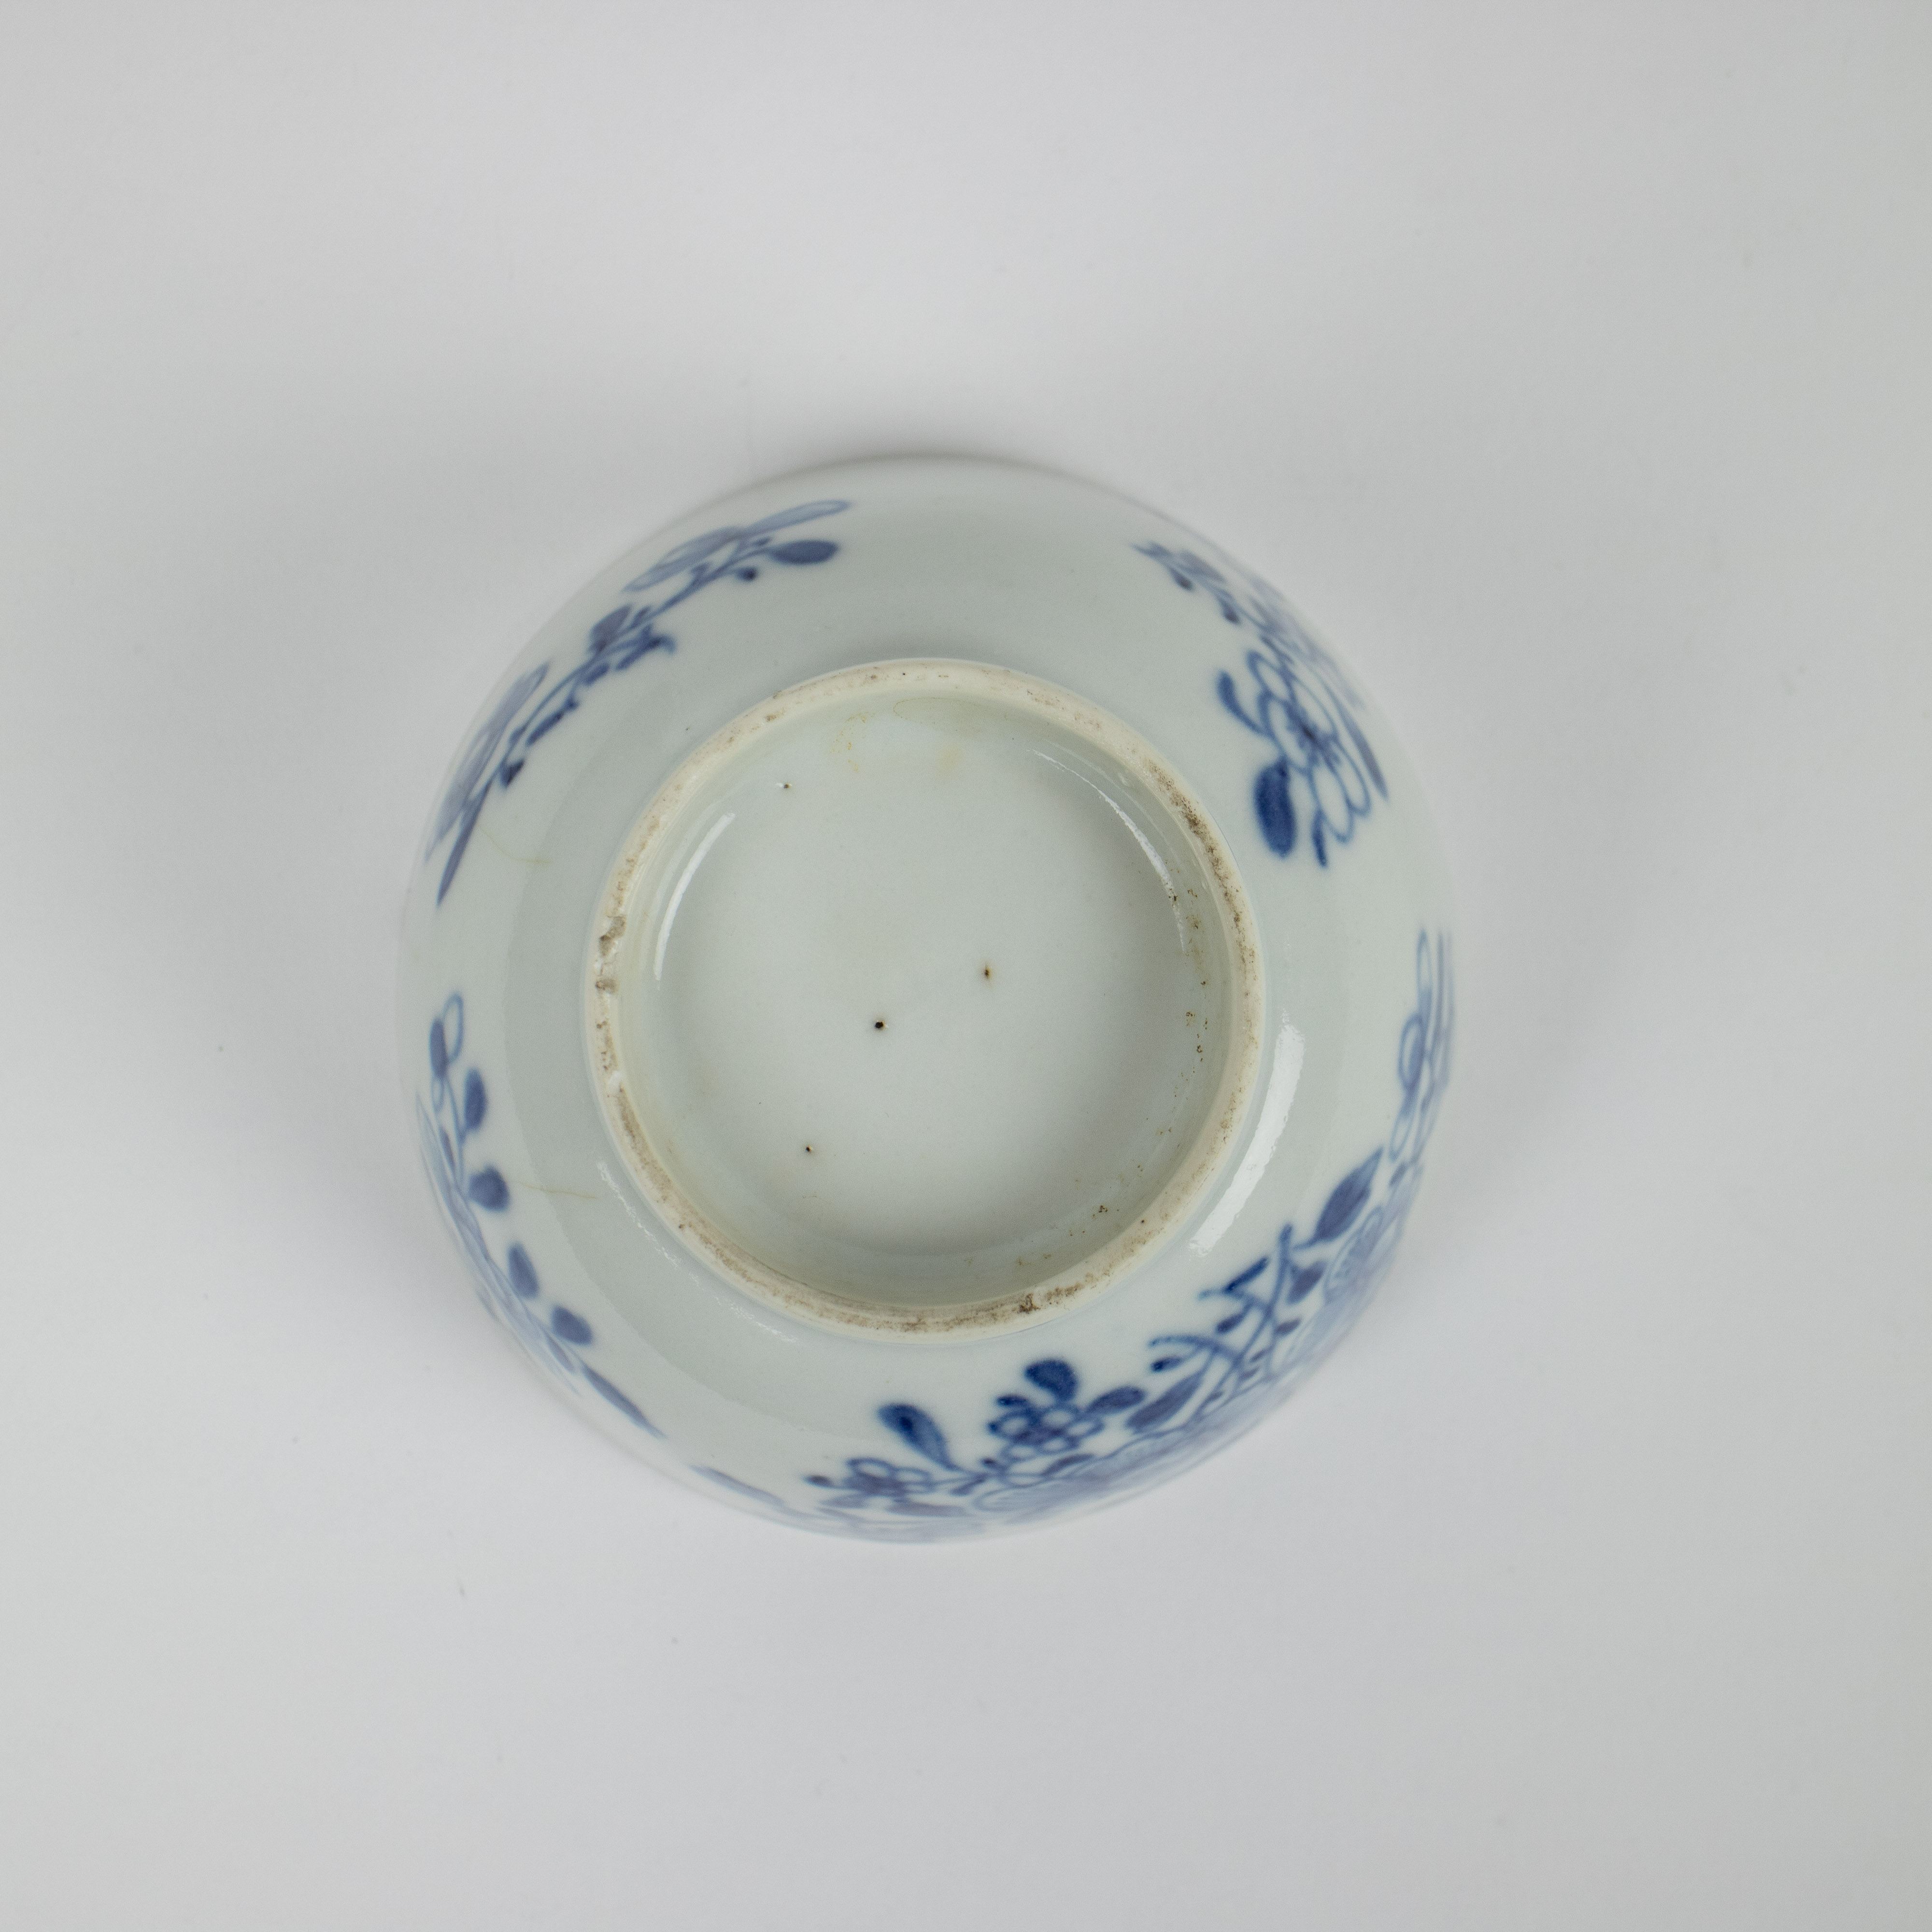 Cappuccino cup and saucer with cranes decor - Image 15 of 18